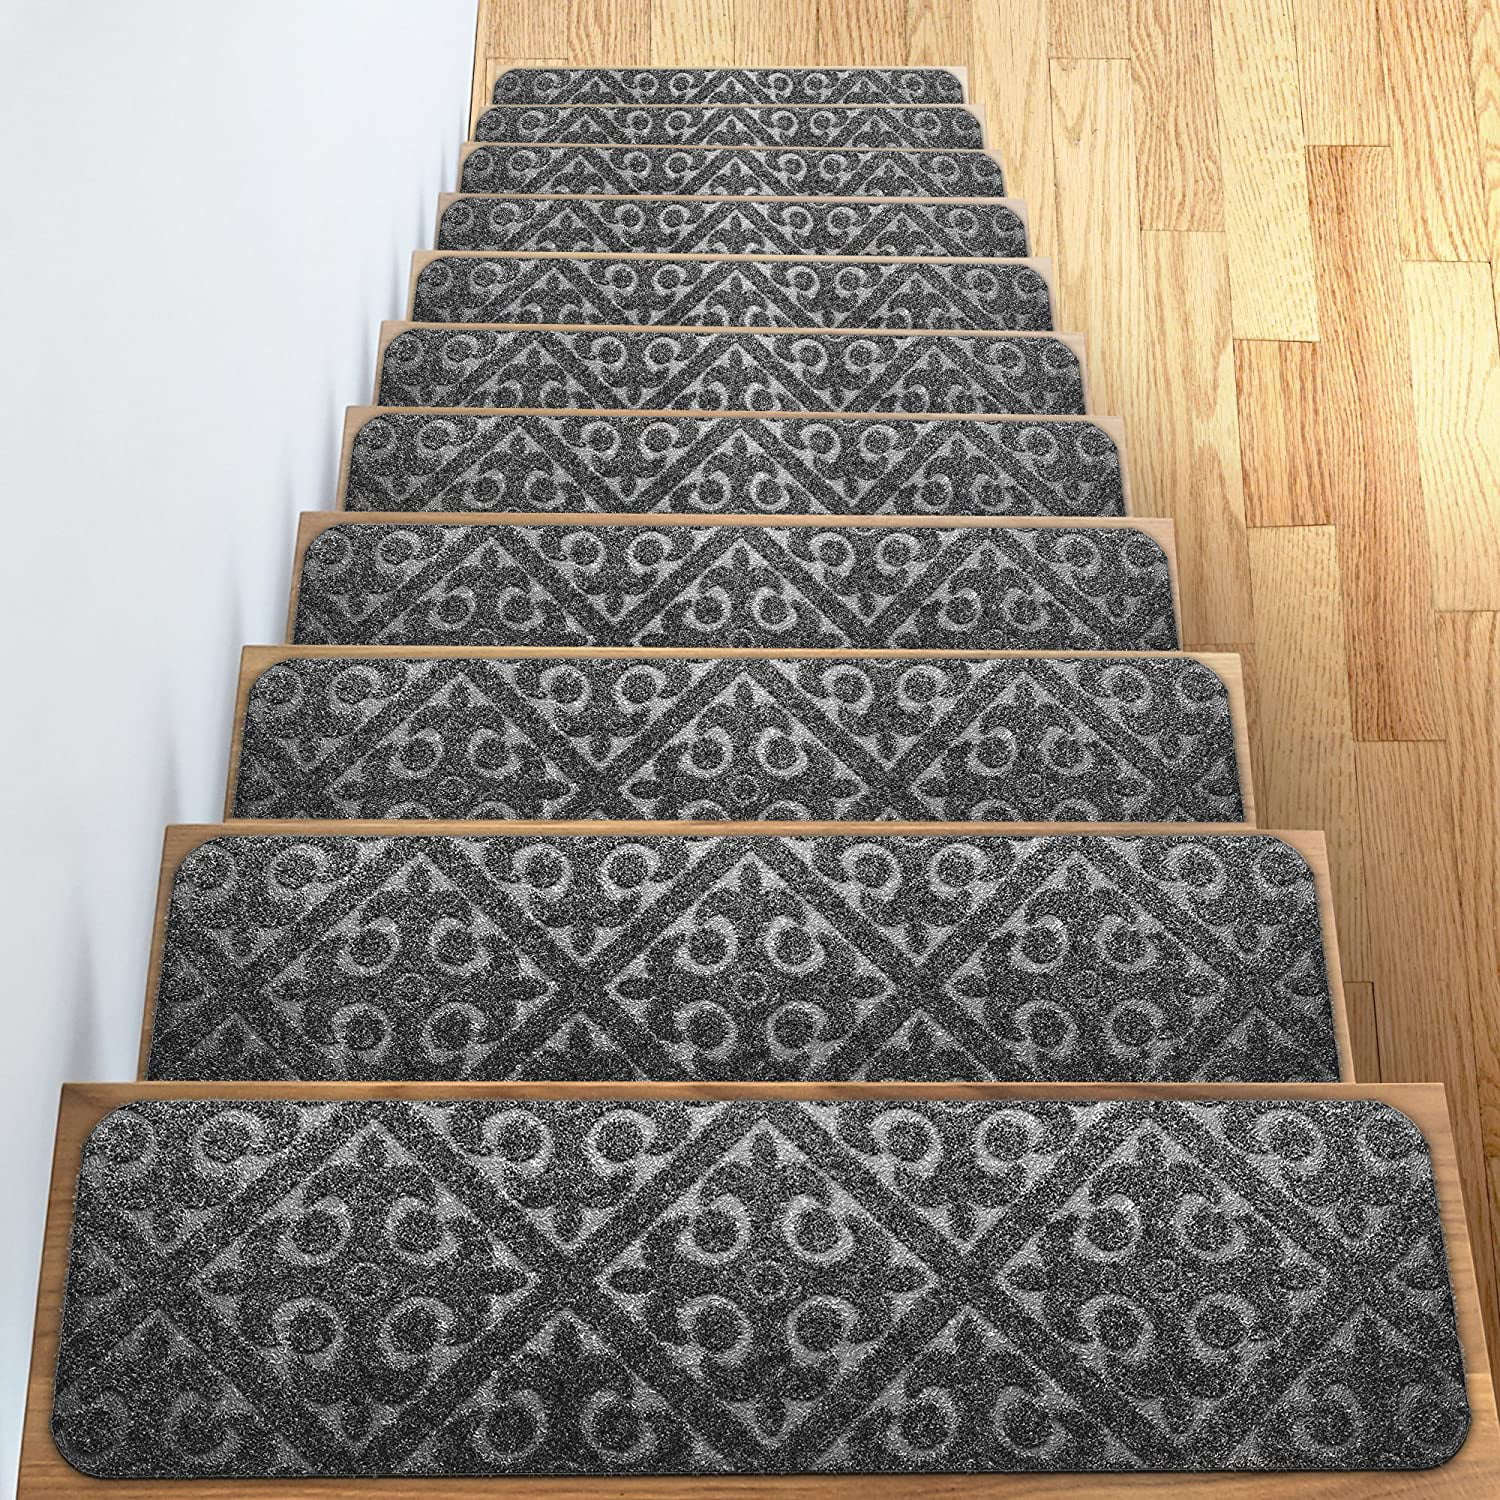 Non Slip Carpet Stair Treads Rugs for Stairs FLORAL Set of 14 8.5" x 26"